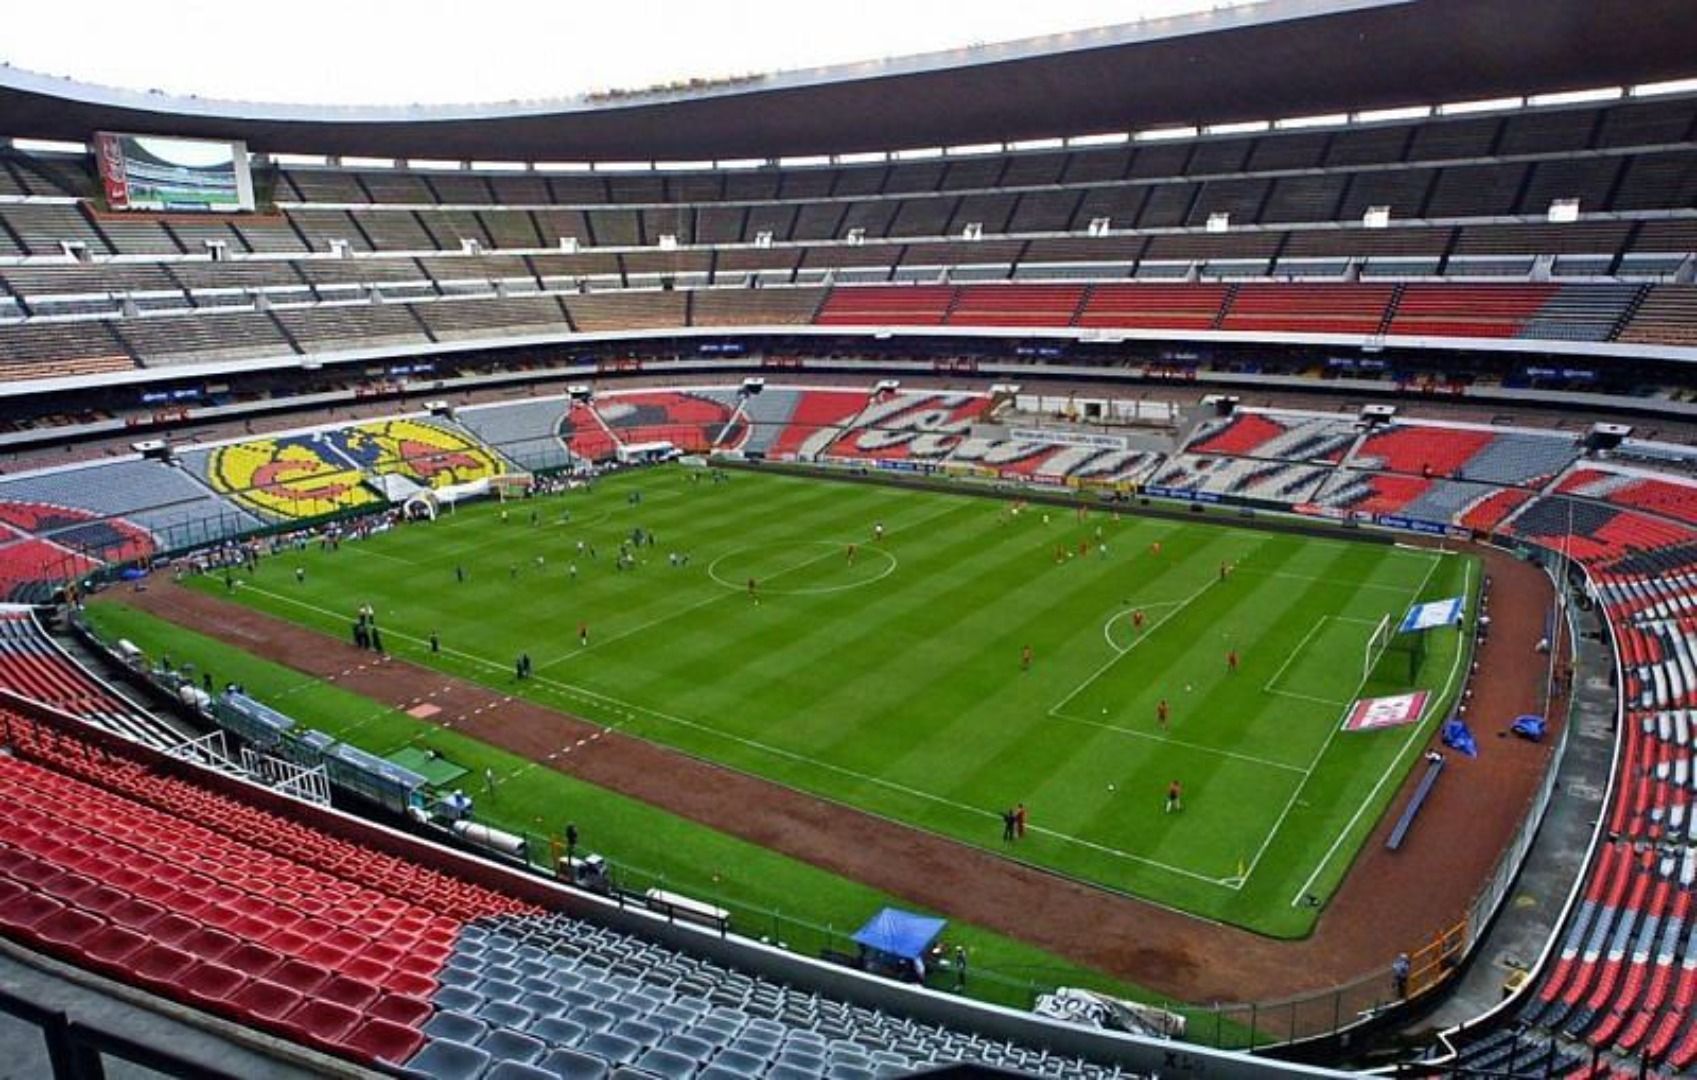 Estadio Azteca has played host to two World Cup finals.